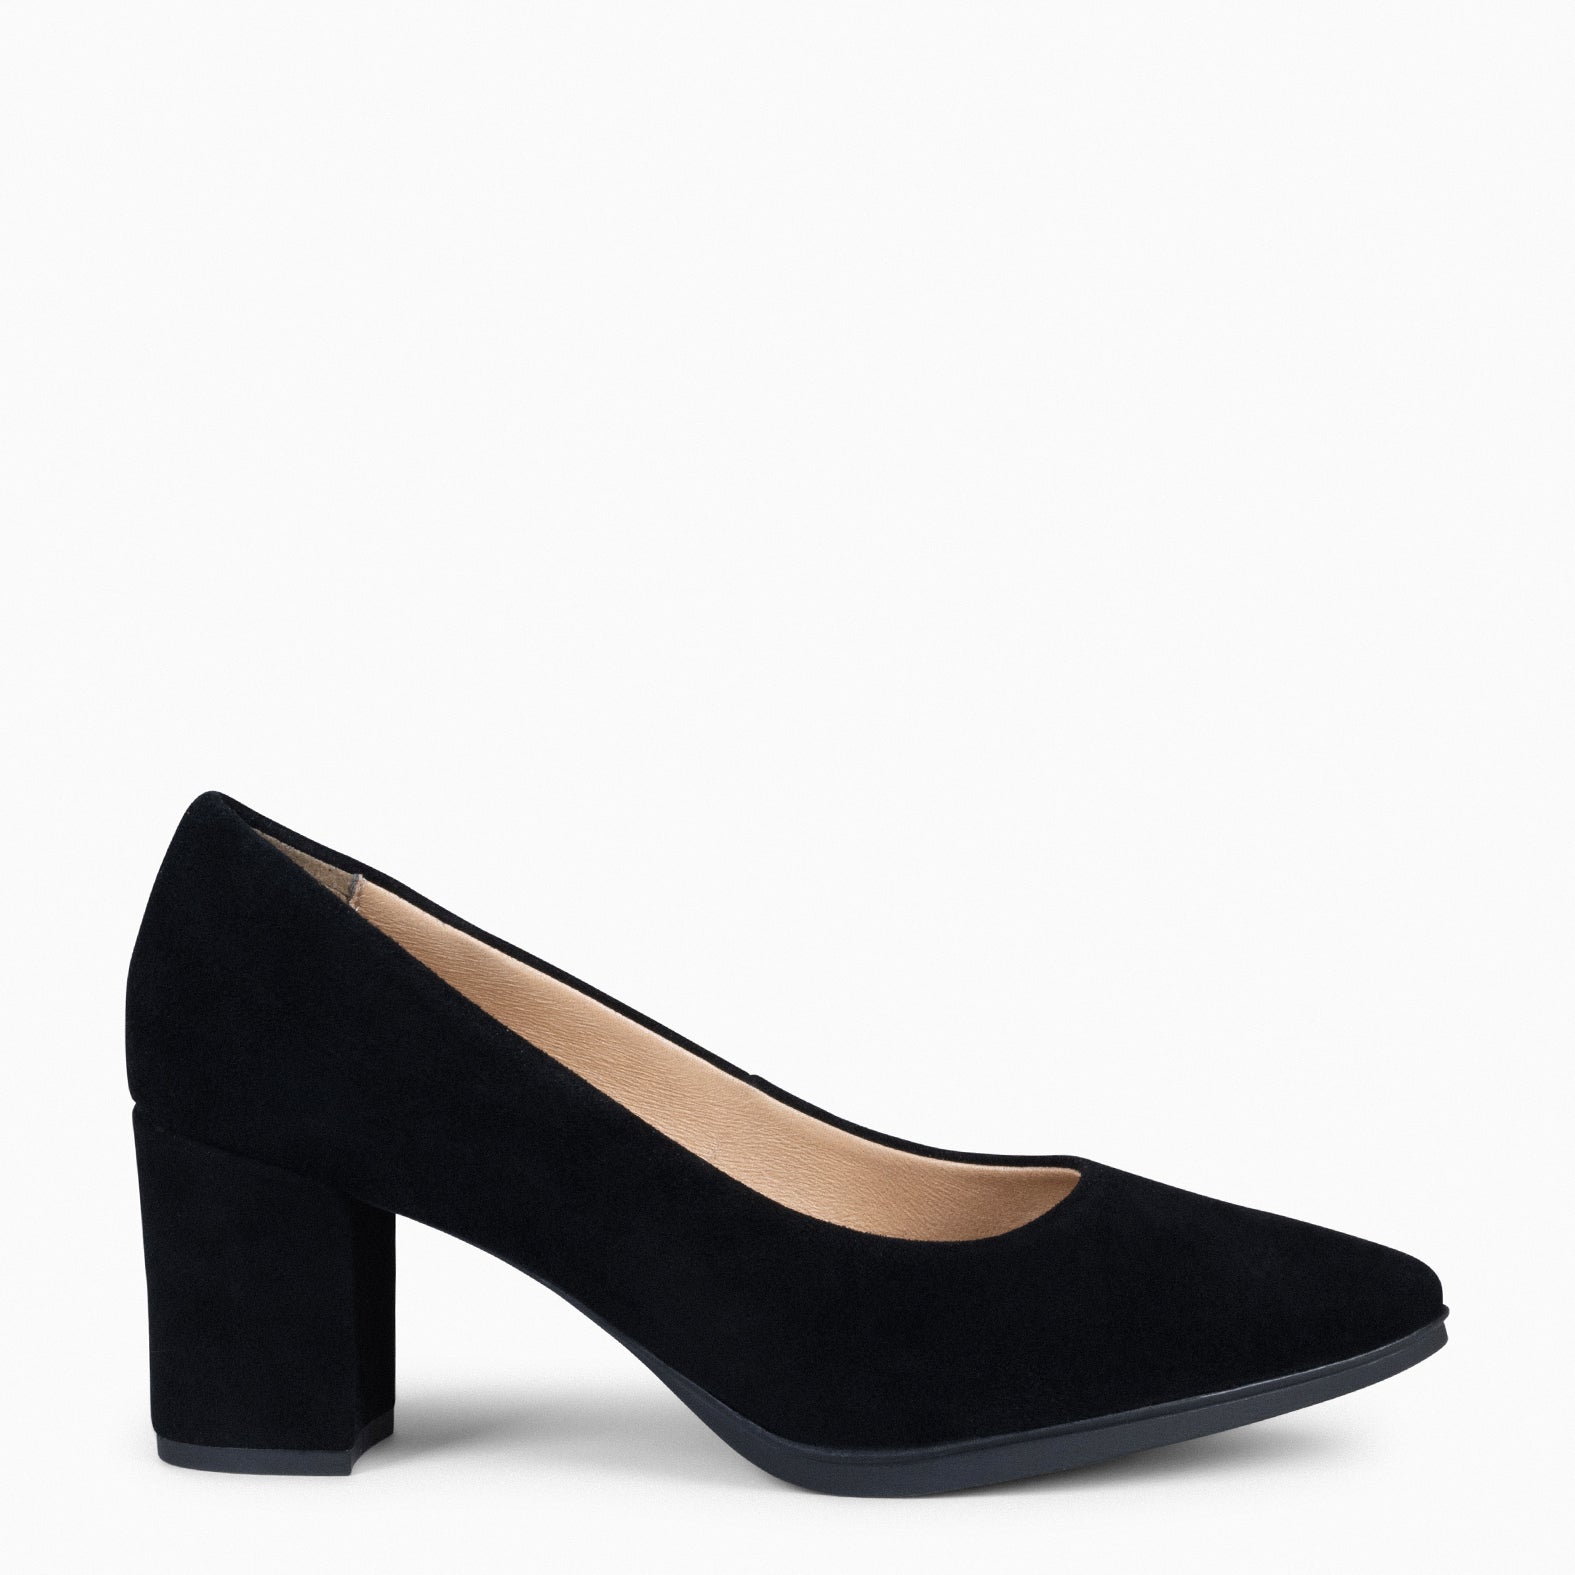 URBAN S – BLACK Suede Mid-Heeled Shoes 